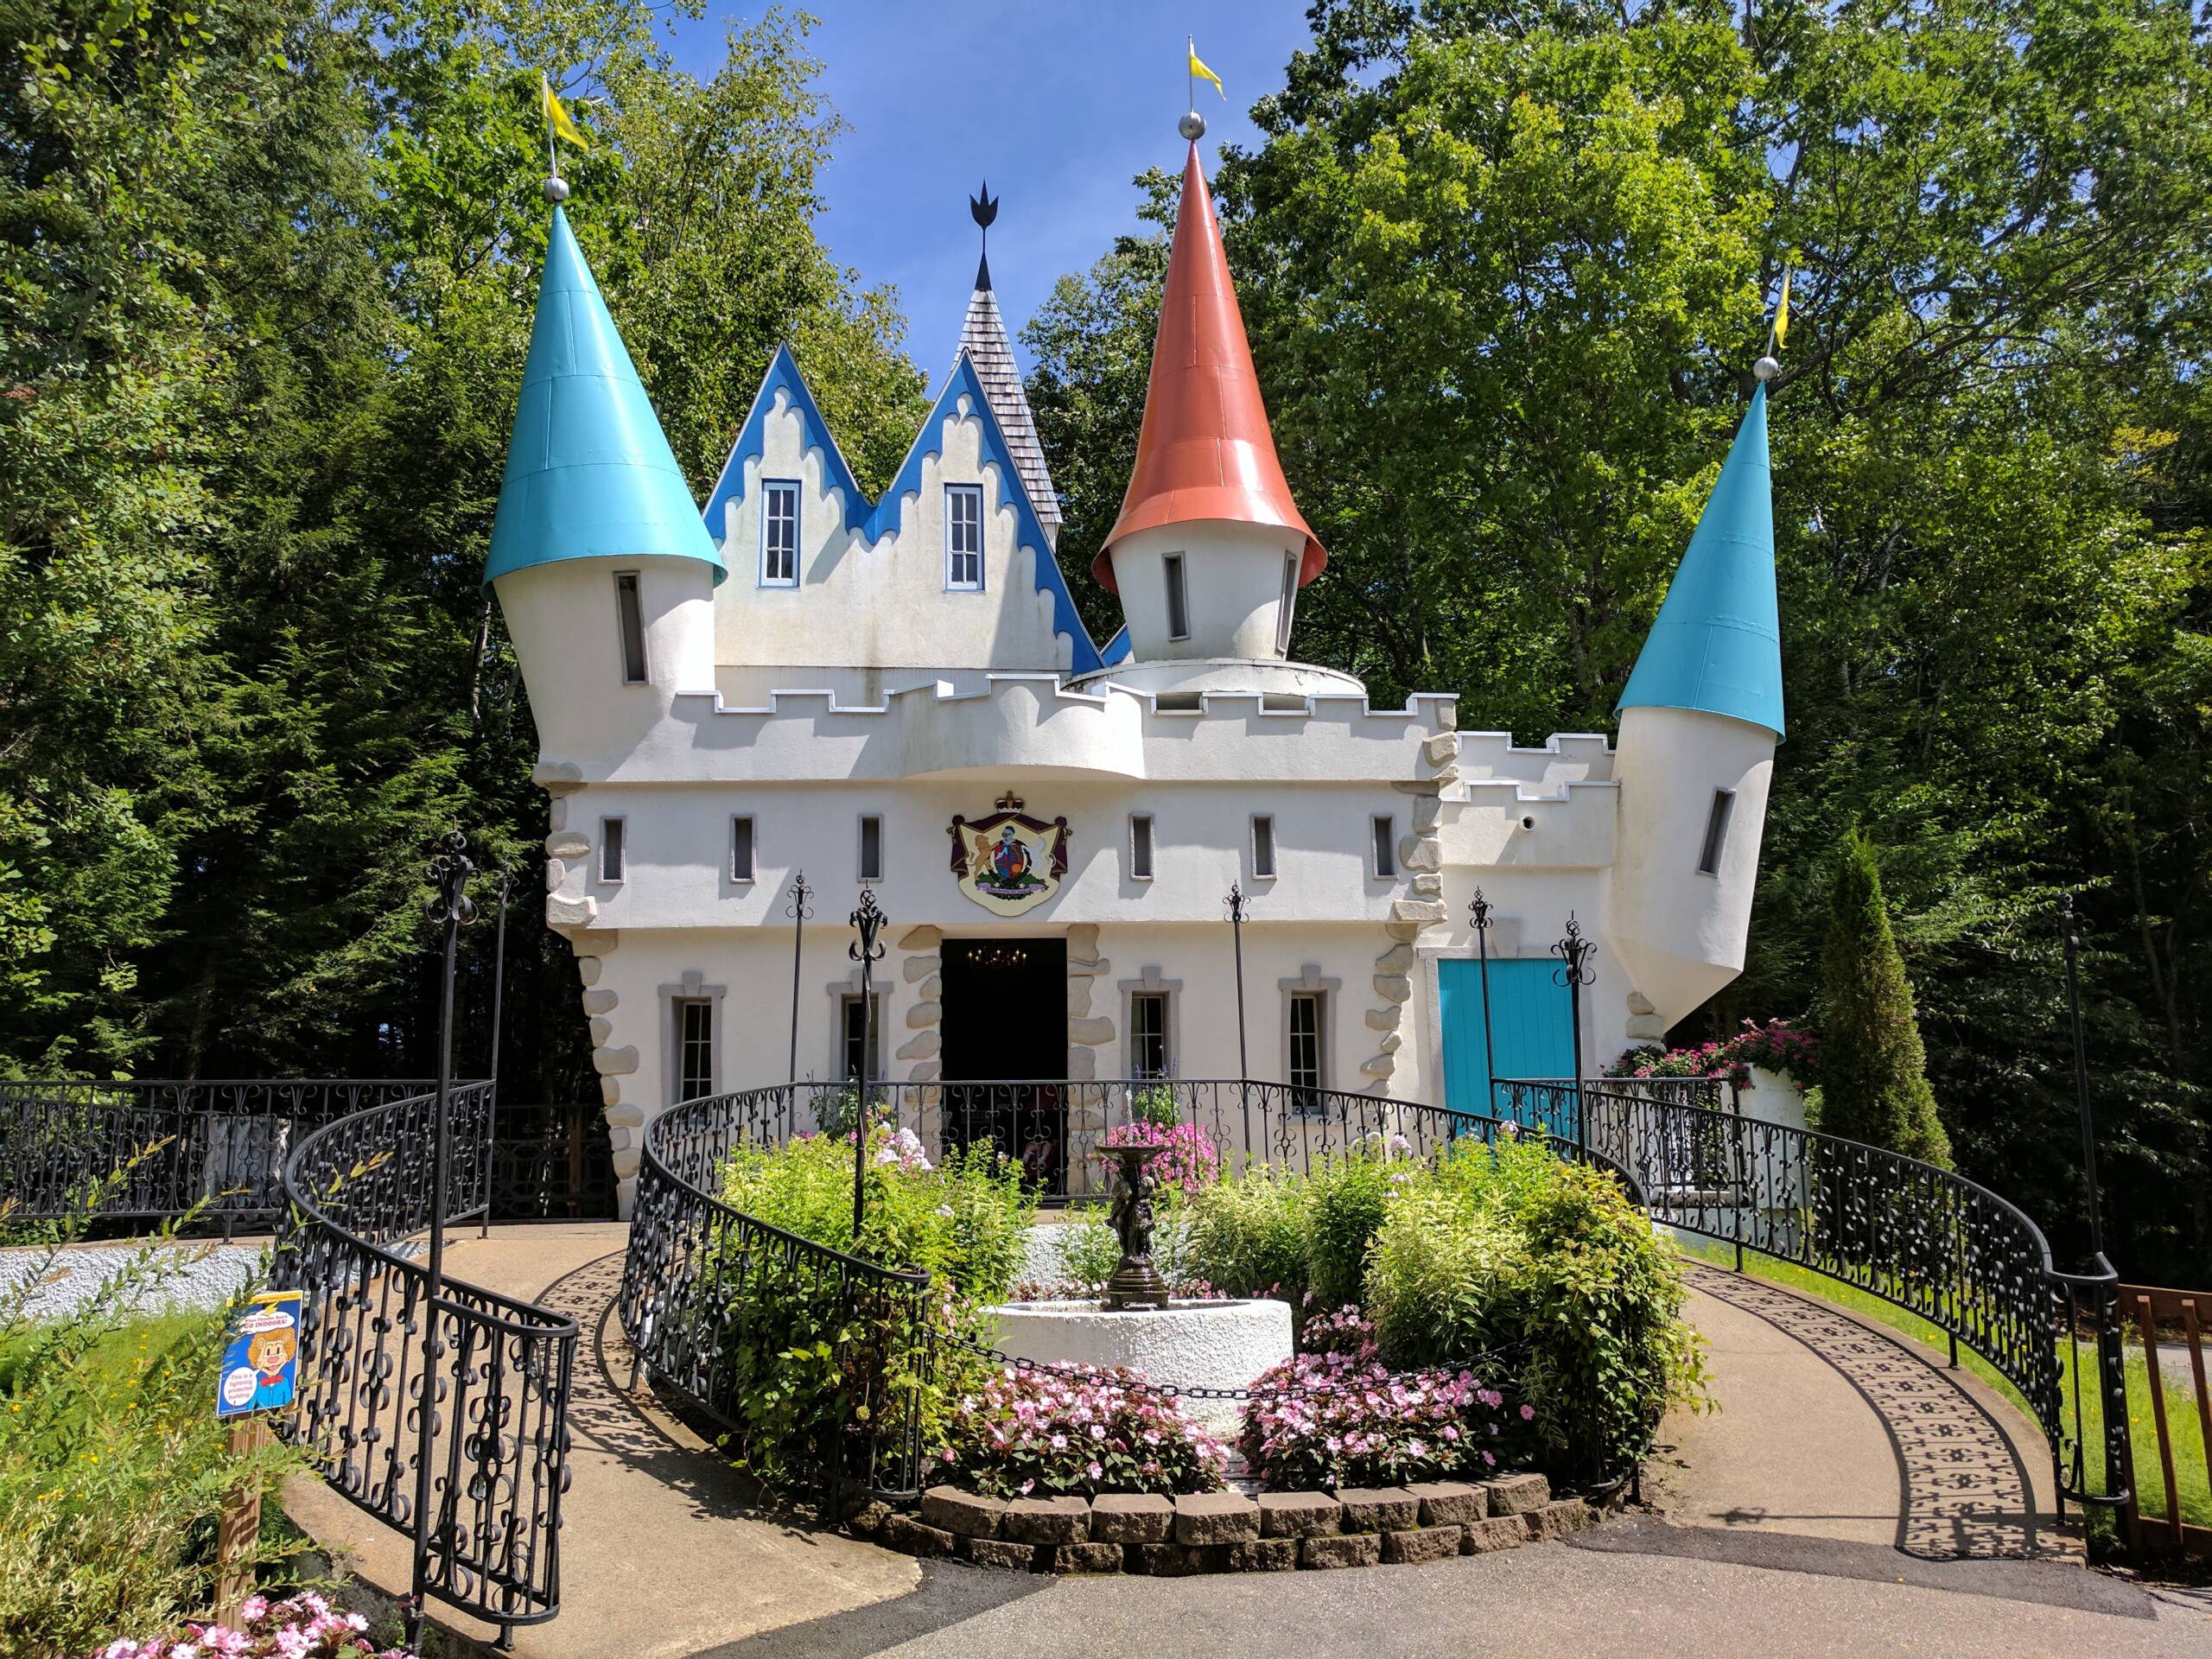 Cinderellas Castle Story Land theme park in Glen NH scaled